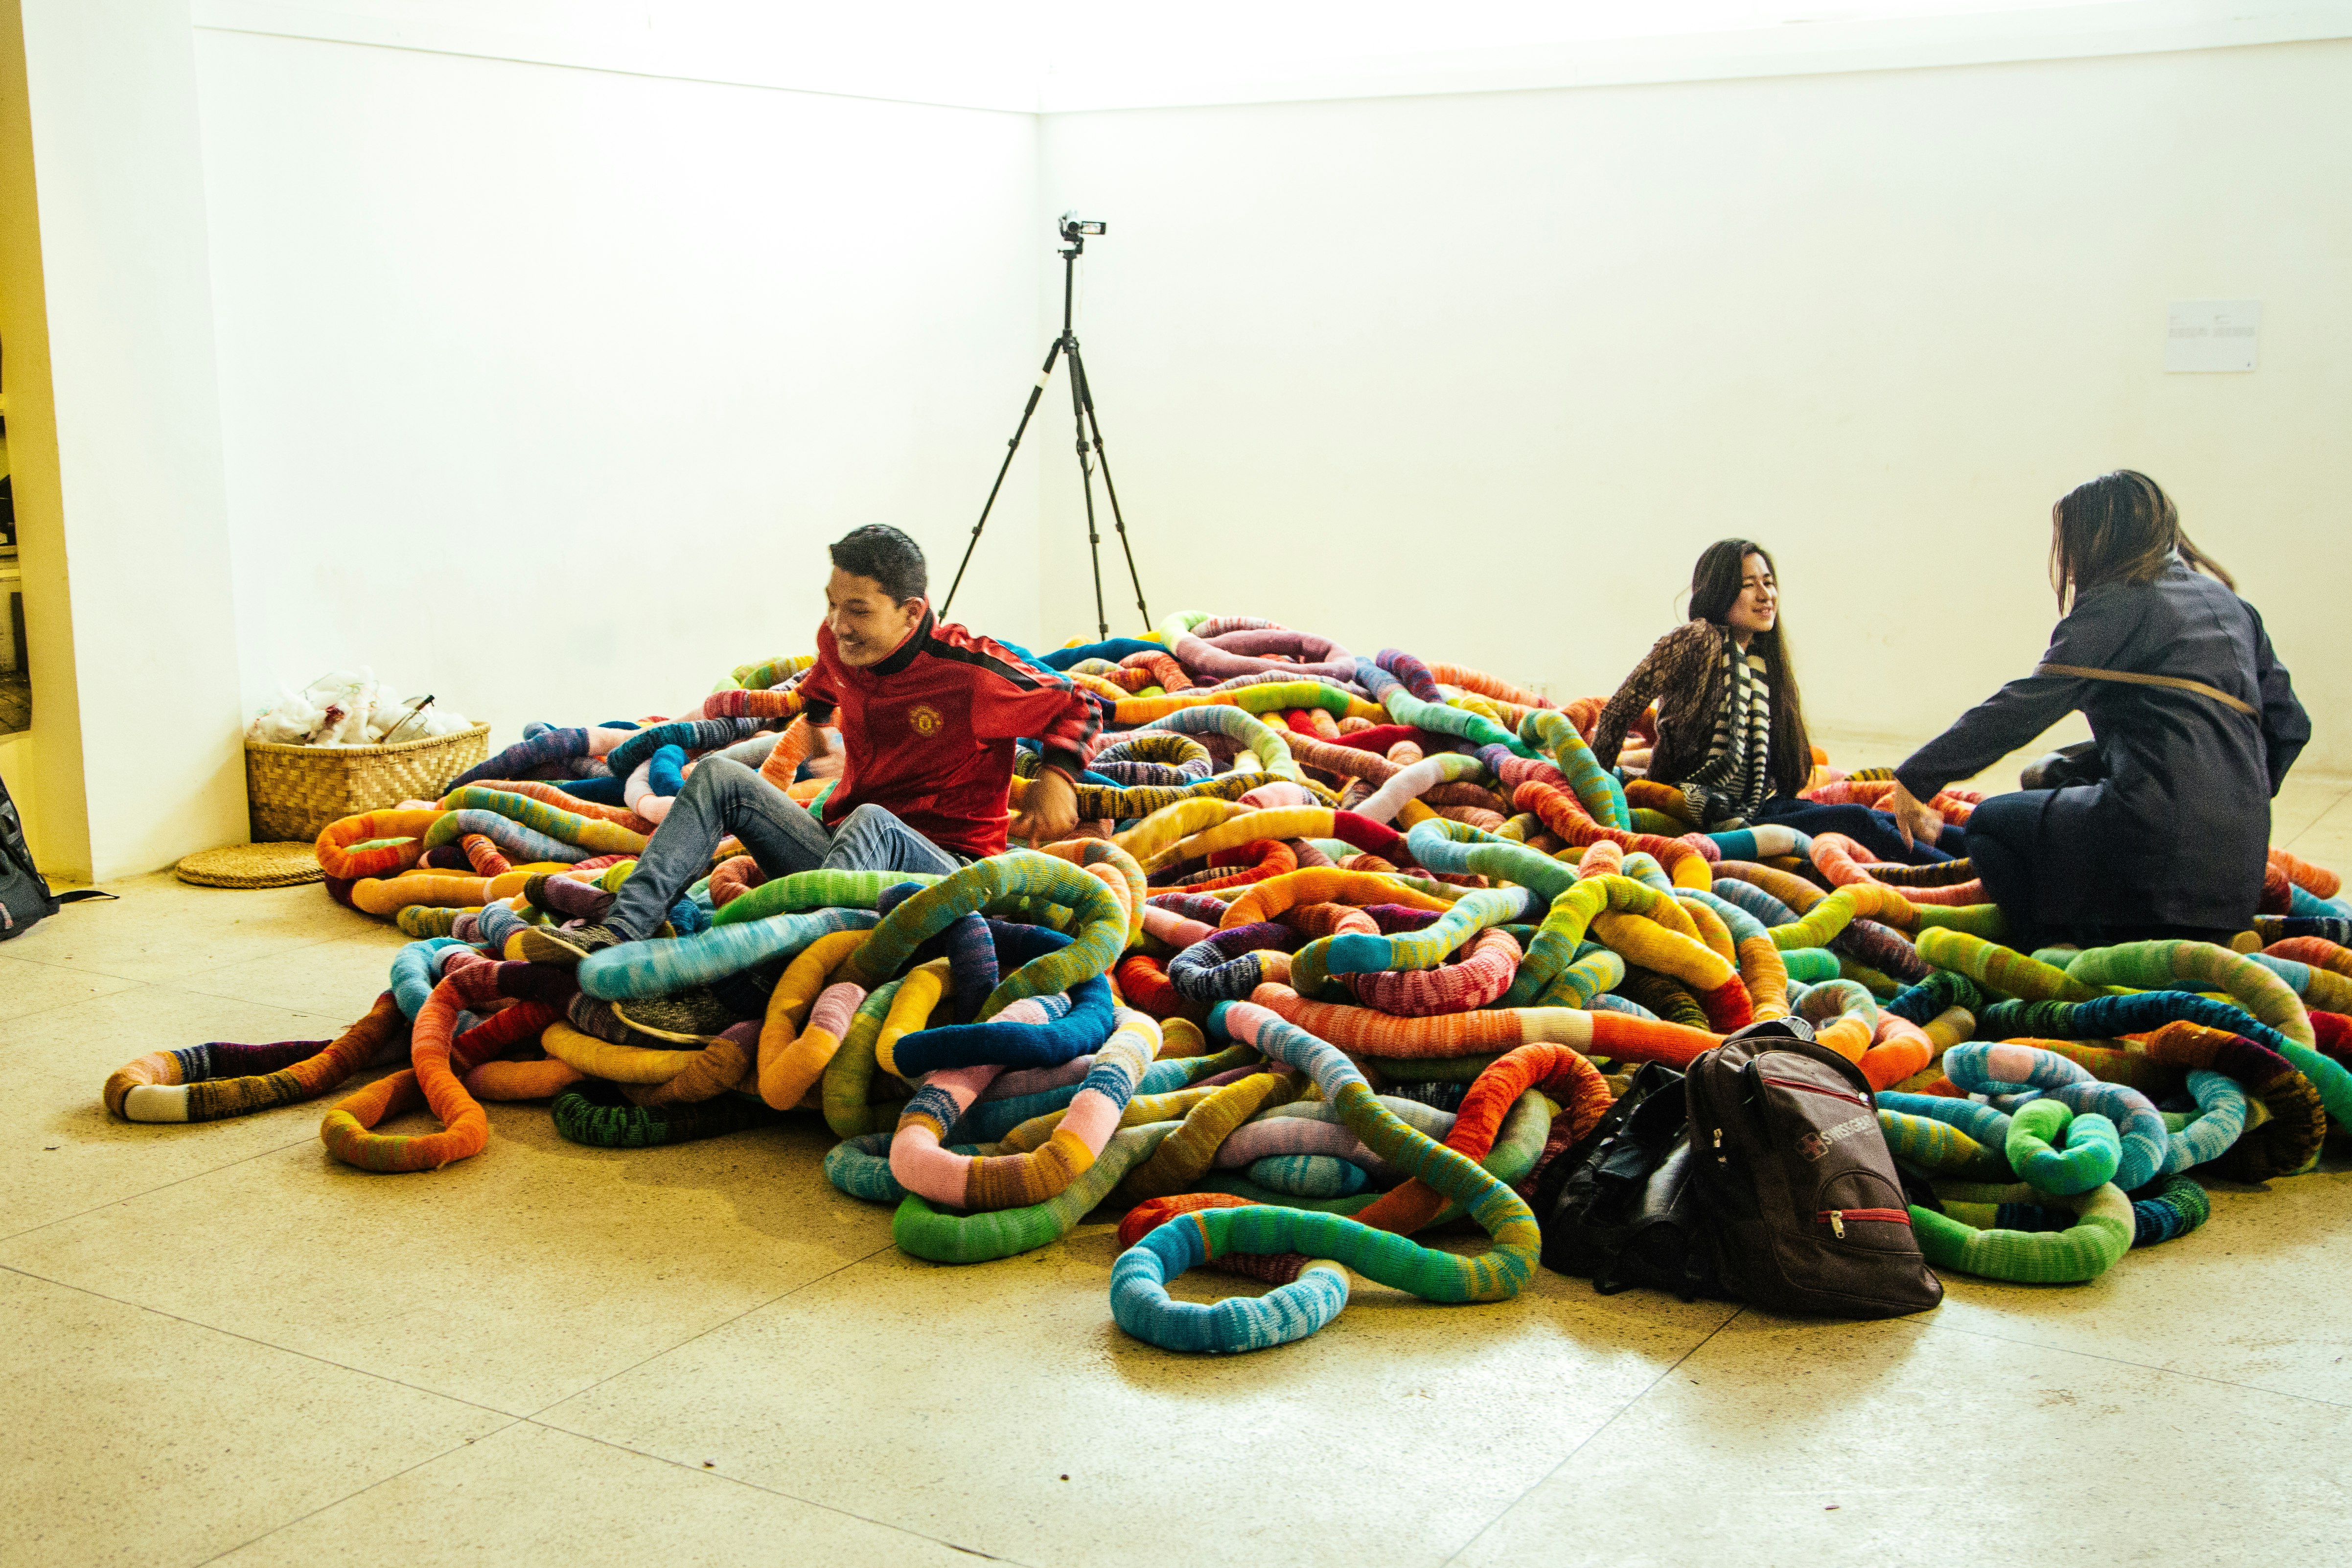 A smiling male-presenting figure and two female-presenting figures sit in a pile of woollen worm-like sculptures.